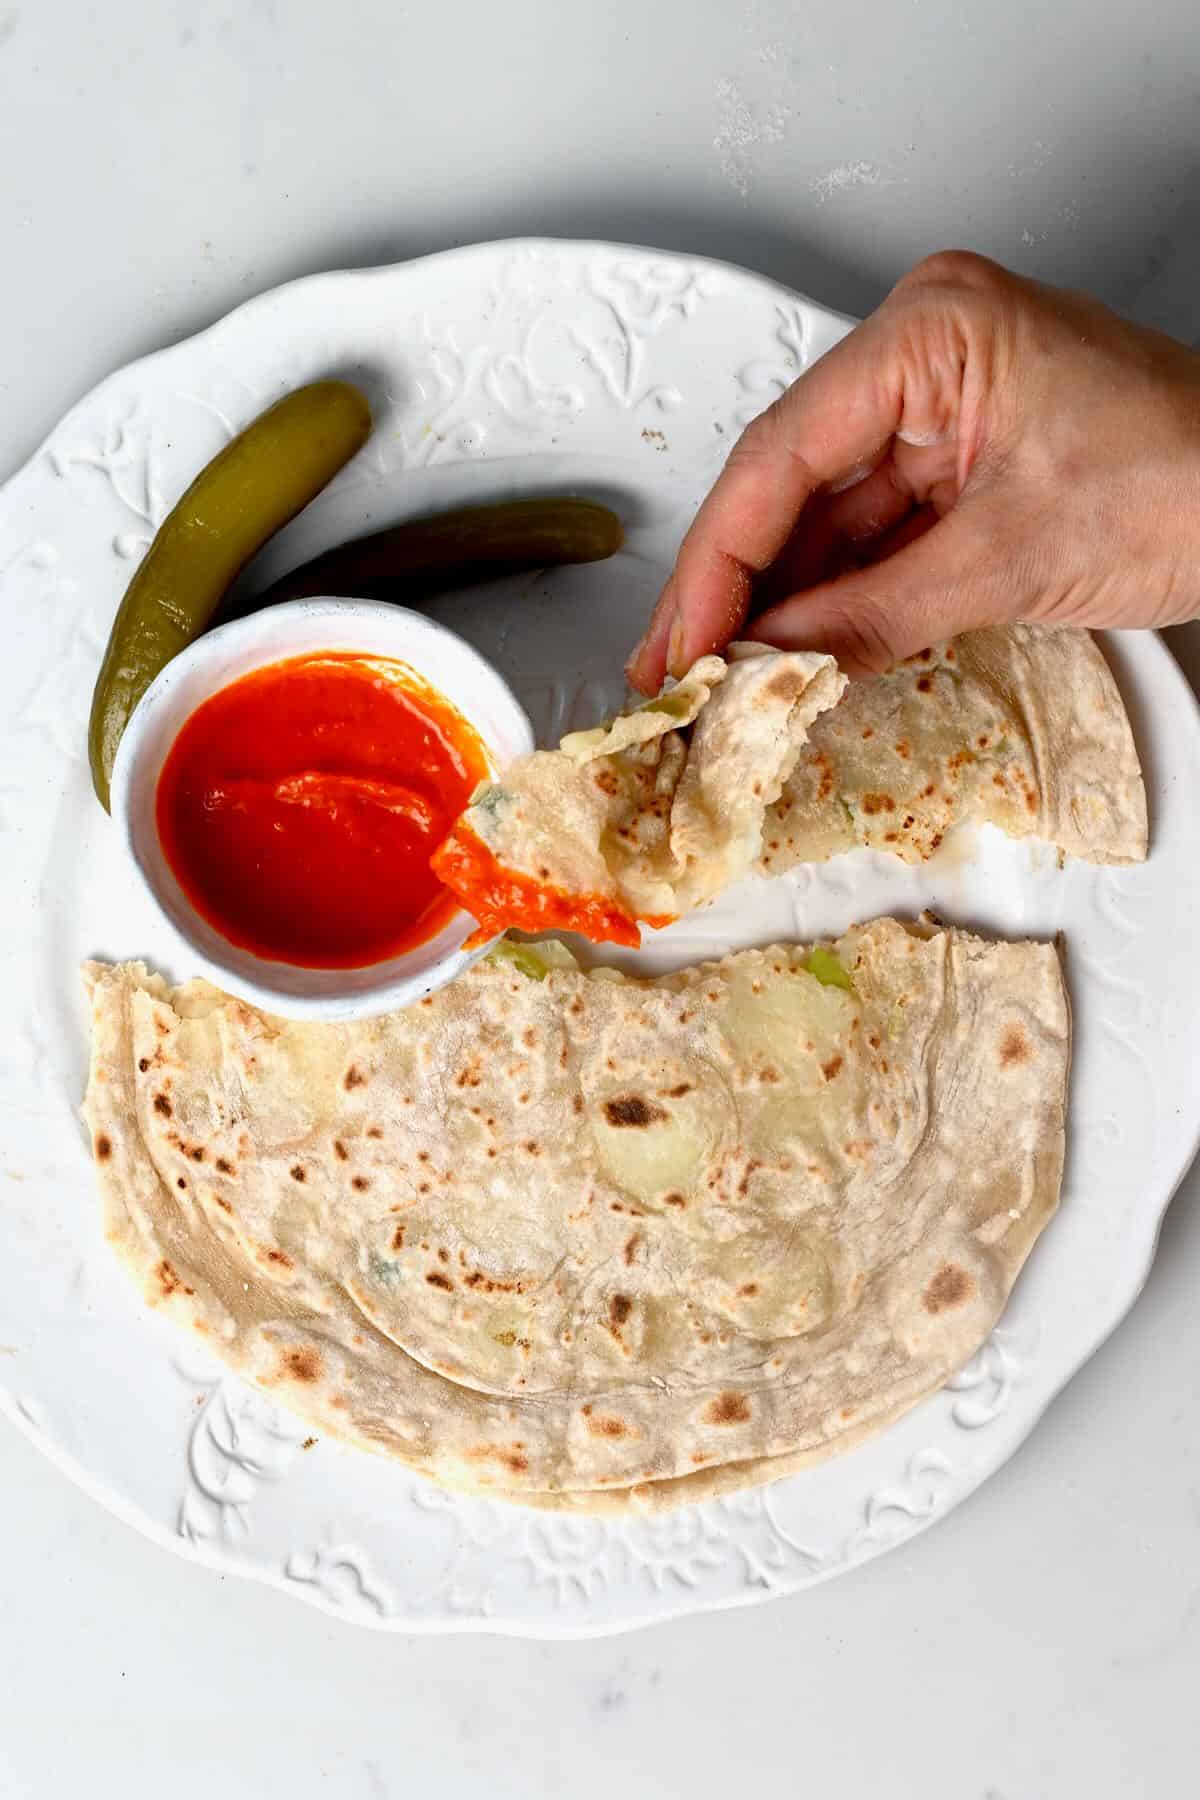 A serving of potato roti with chili sauce and pickles